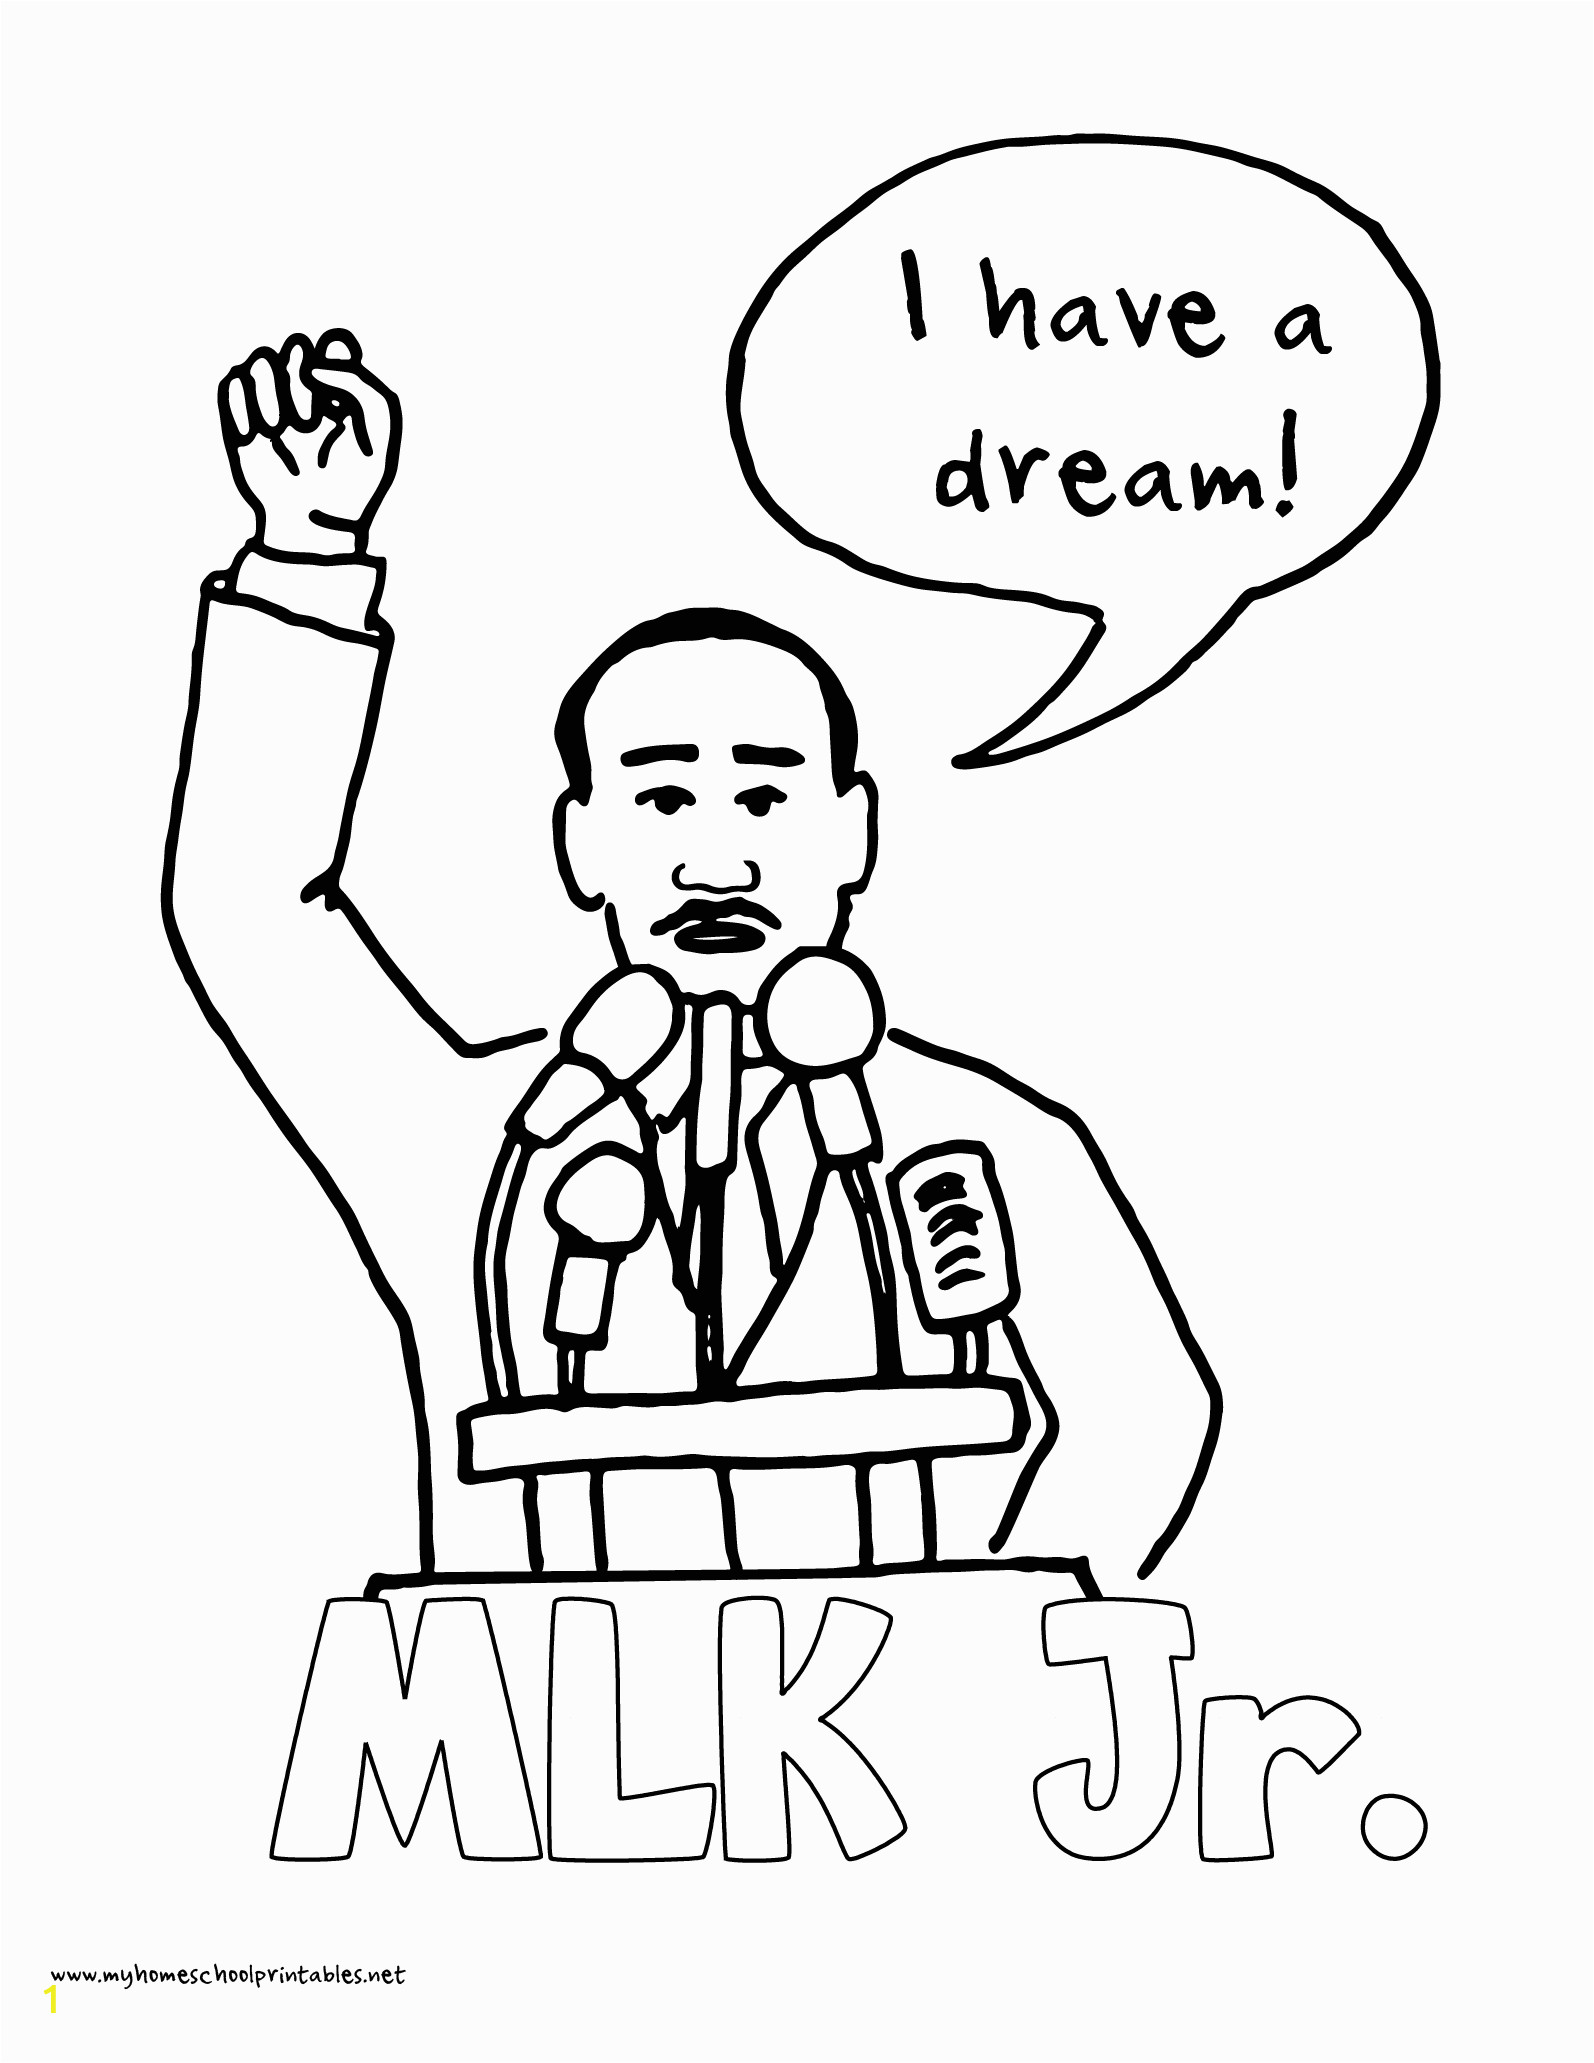 martin luther king coloringes printable history volume mystery of phenomenal